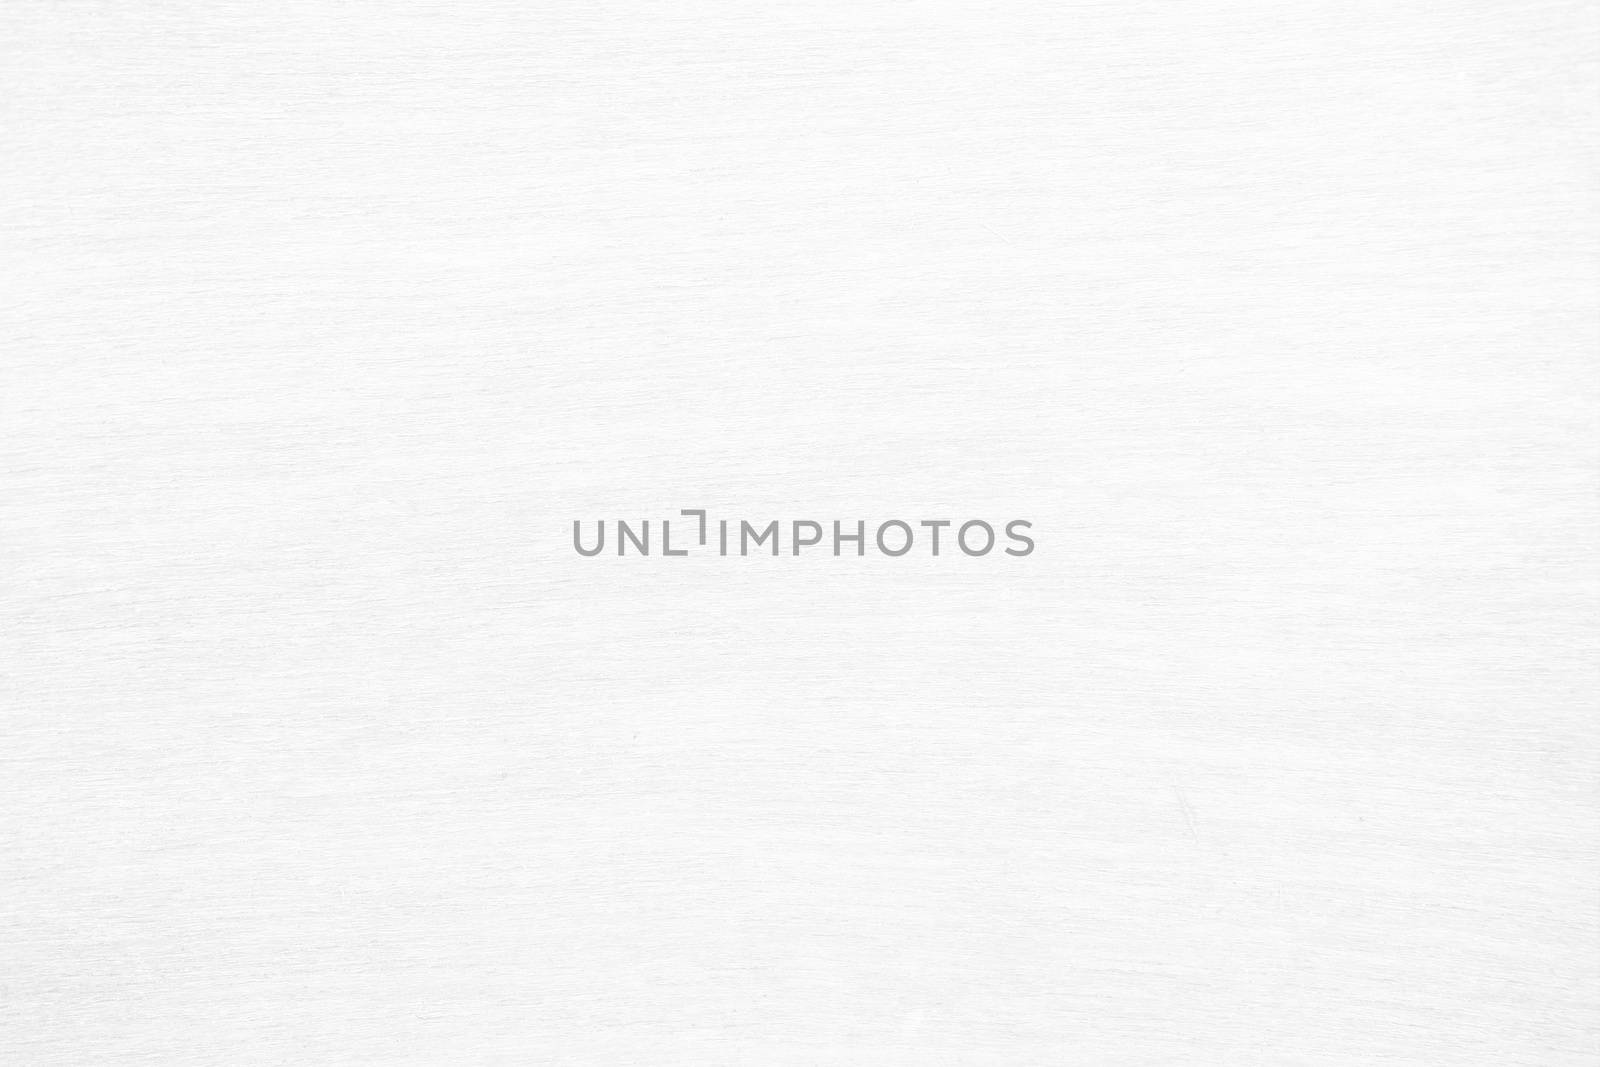 White Wood Texture Background. by mesamong